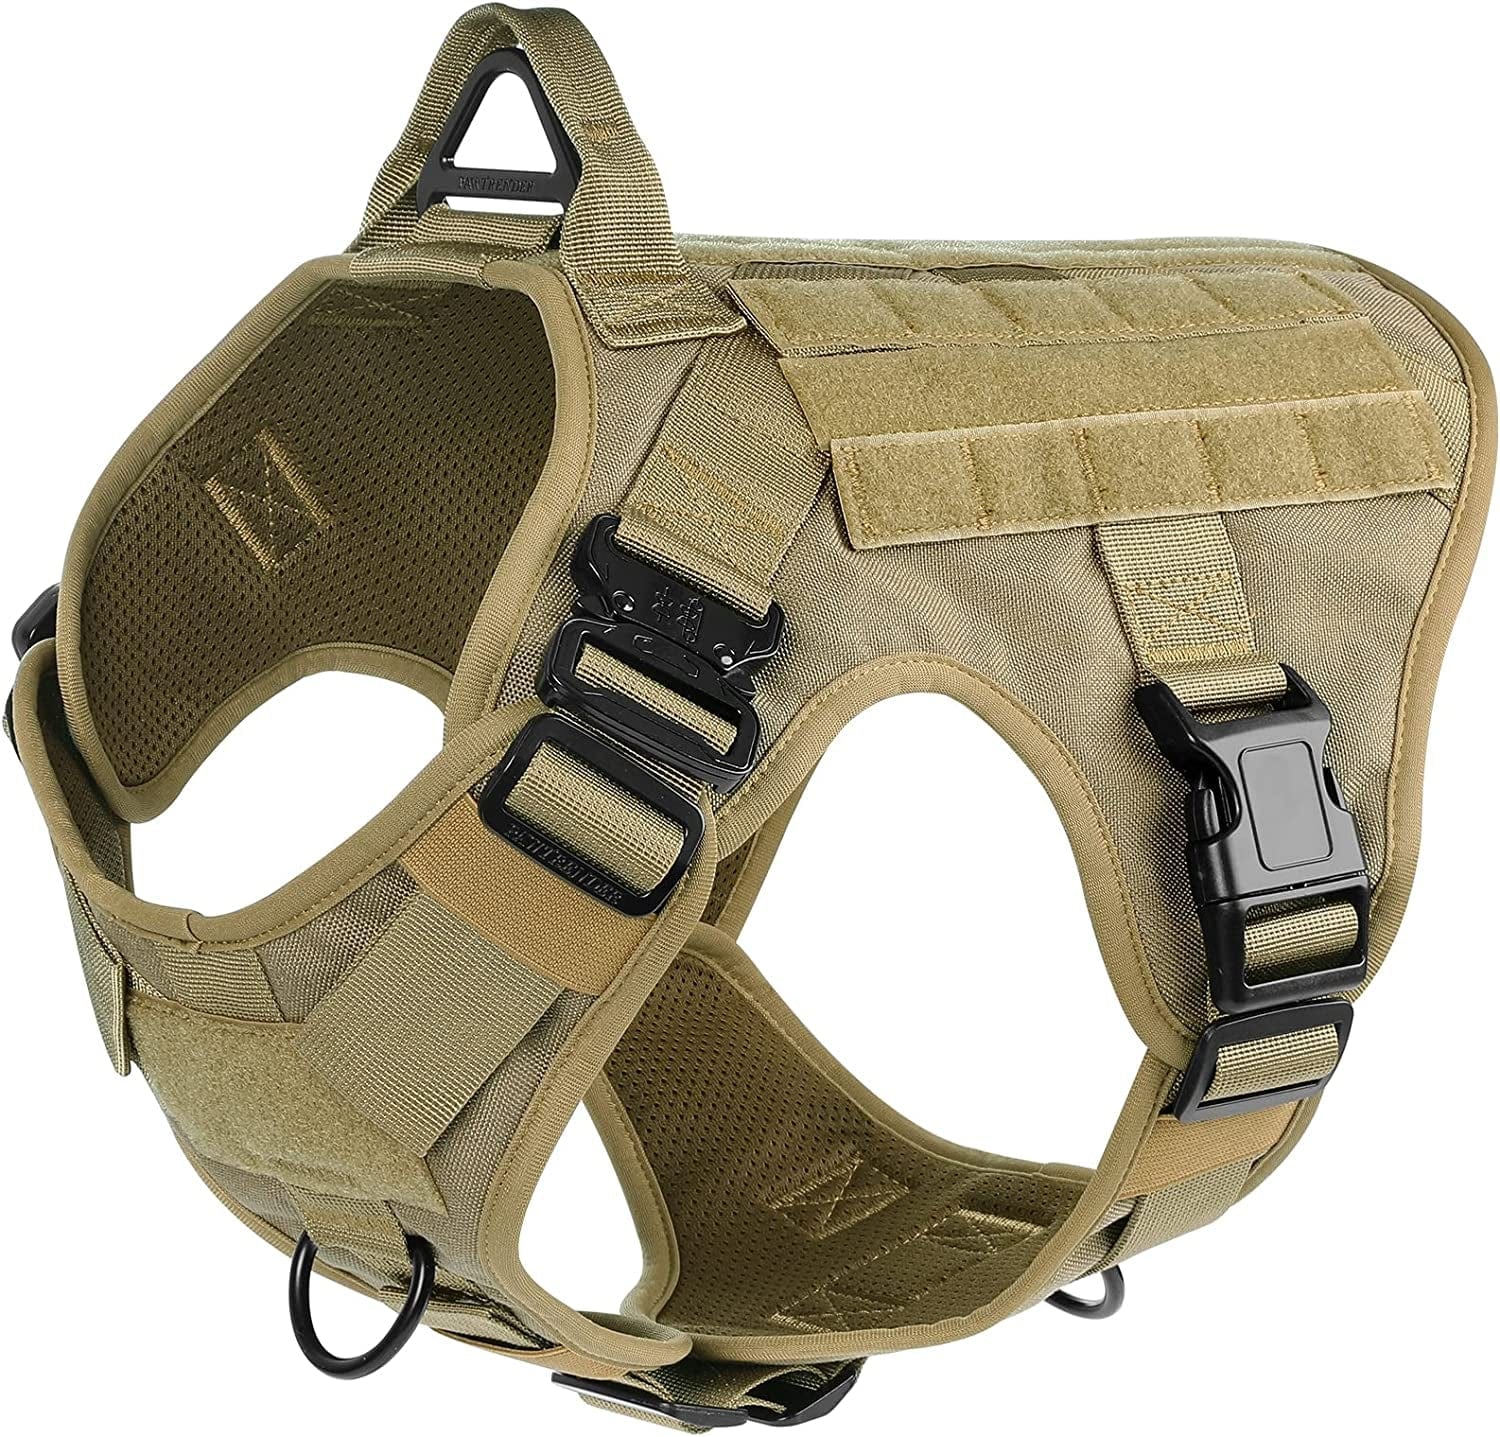 PAWTRENDER Tactical Dog Harness for Large Dogs No Pull, Adjustable Service Dog Vest Harness with Handle, Heavy Duty Big Dog Harness for Walking Running Training Working Hiking, Black, L Animals & Pet Supplies > Pet Supplies > Dog Supplies > Dog Apparel PAWTRENDER Brown X-Large 